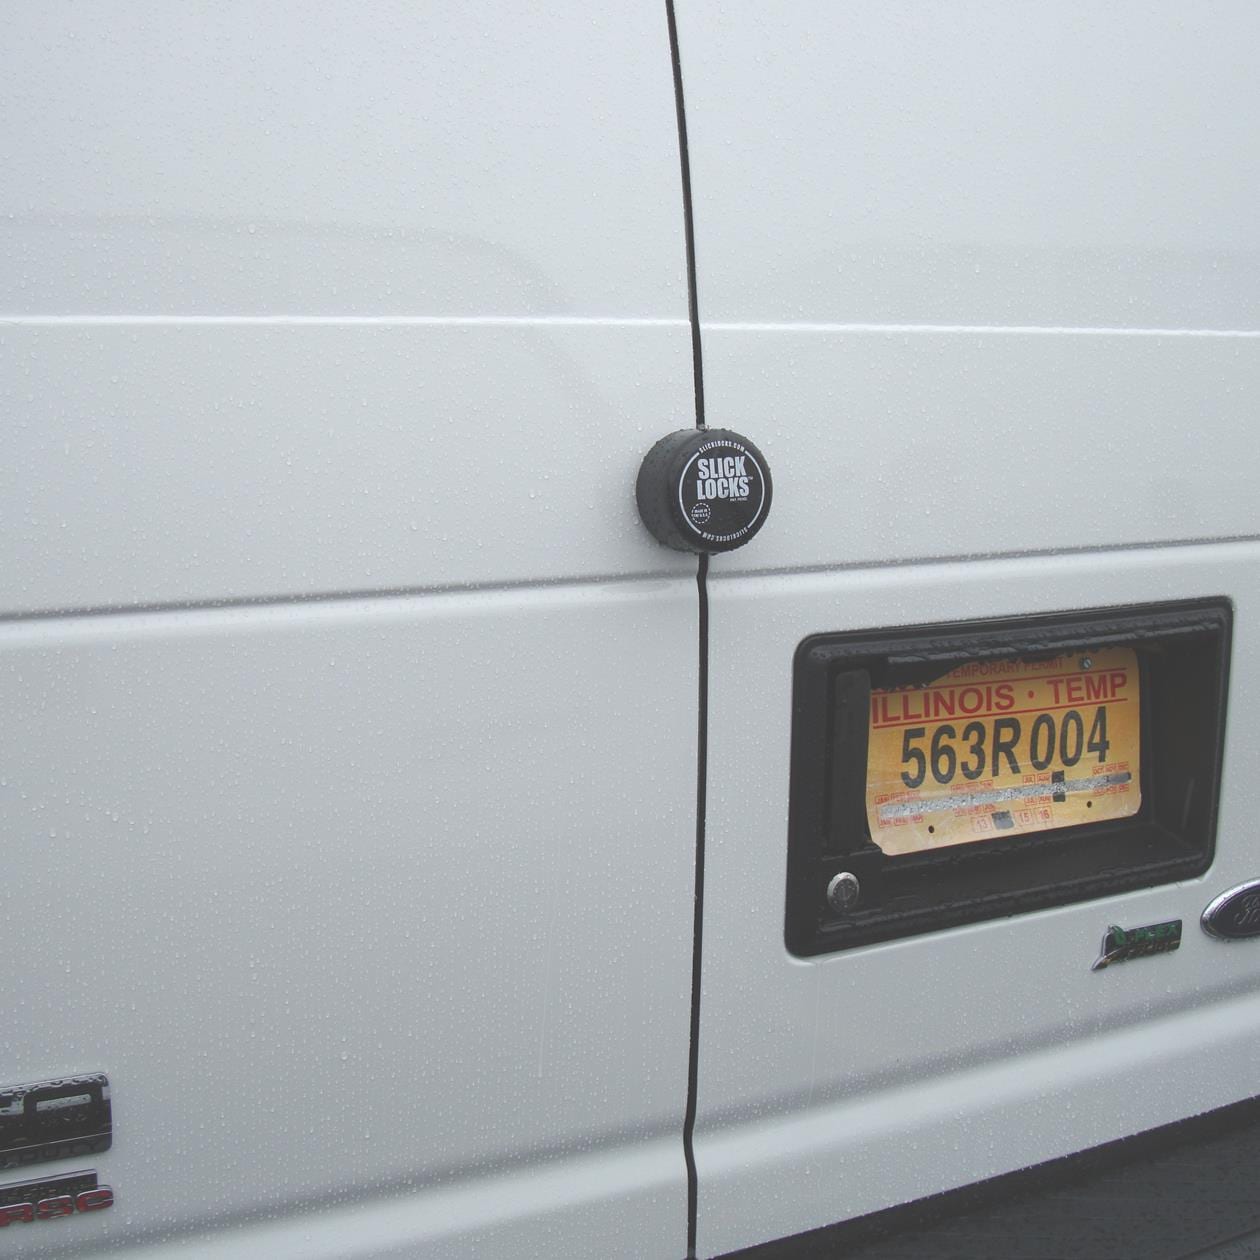 Slick Locks Chevy//GMC Sliding Door Kit Complete with Spinners Weather covers and Locks